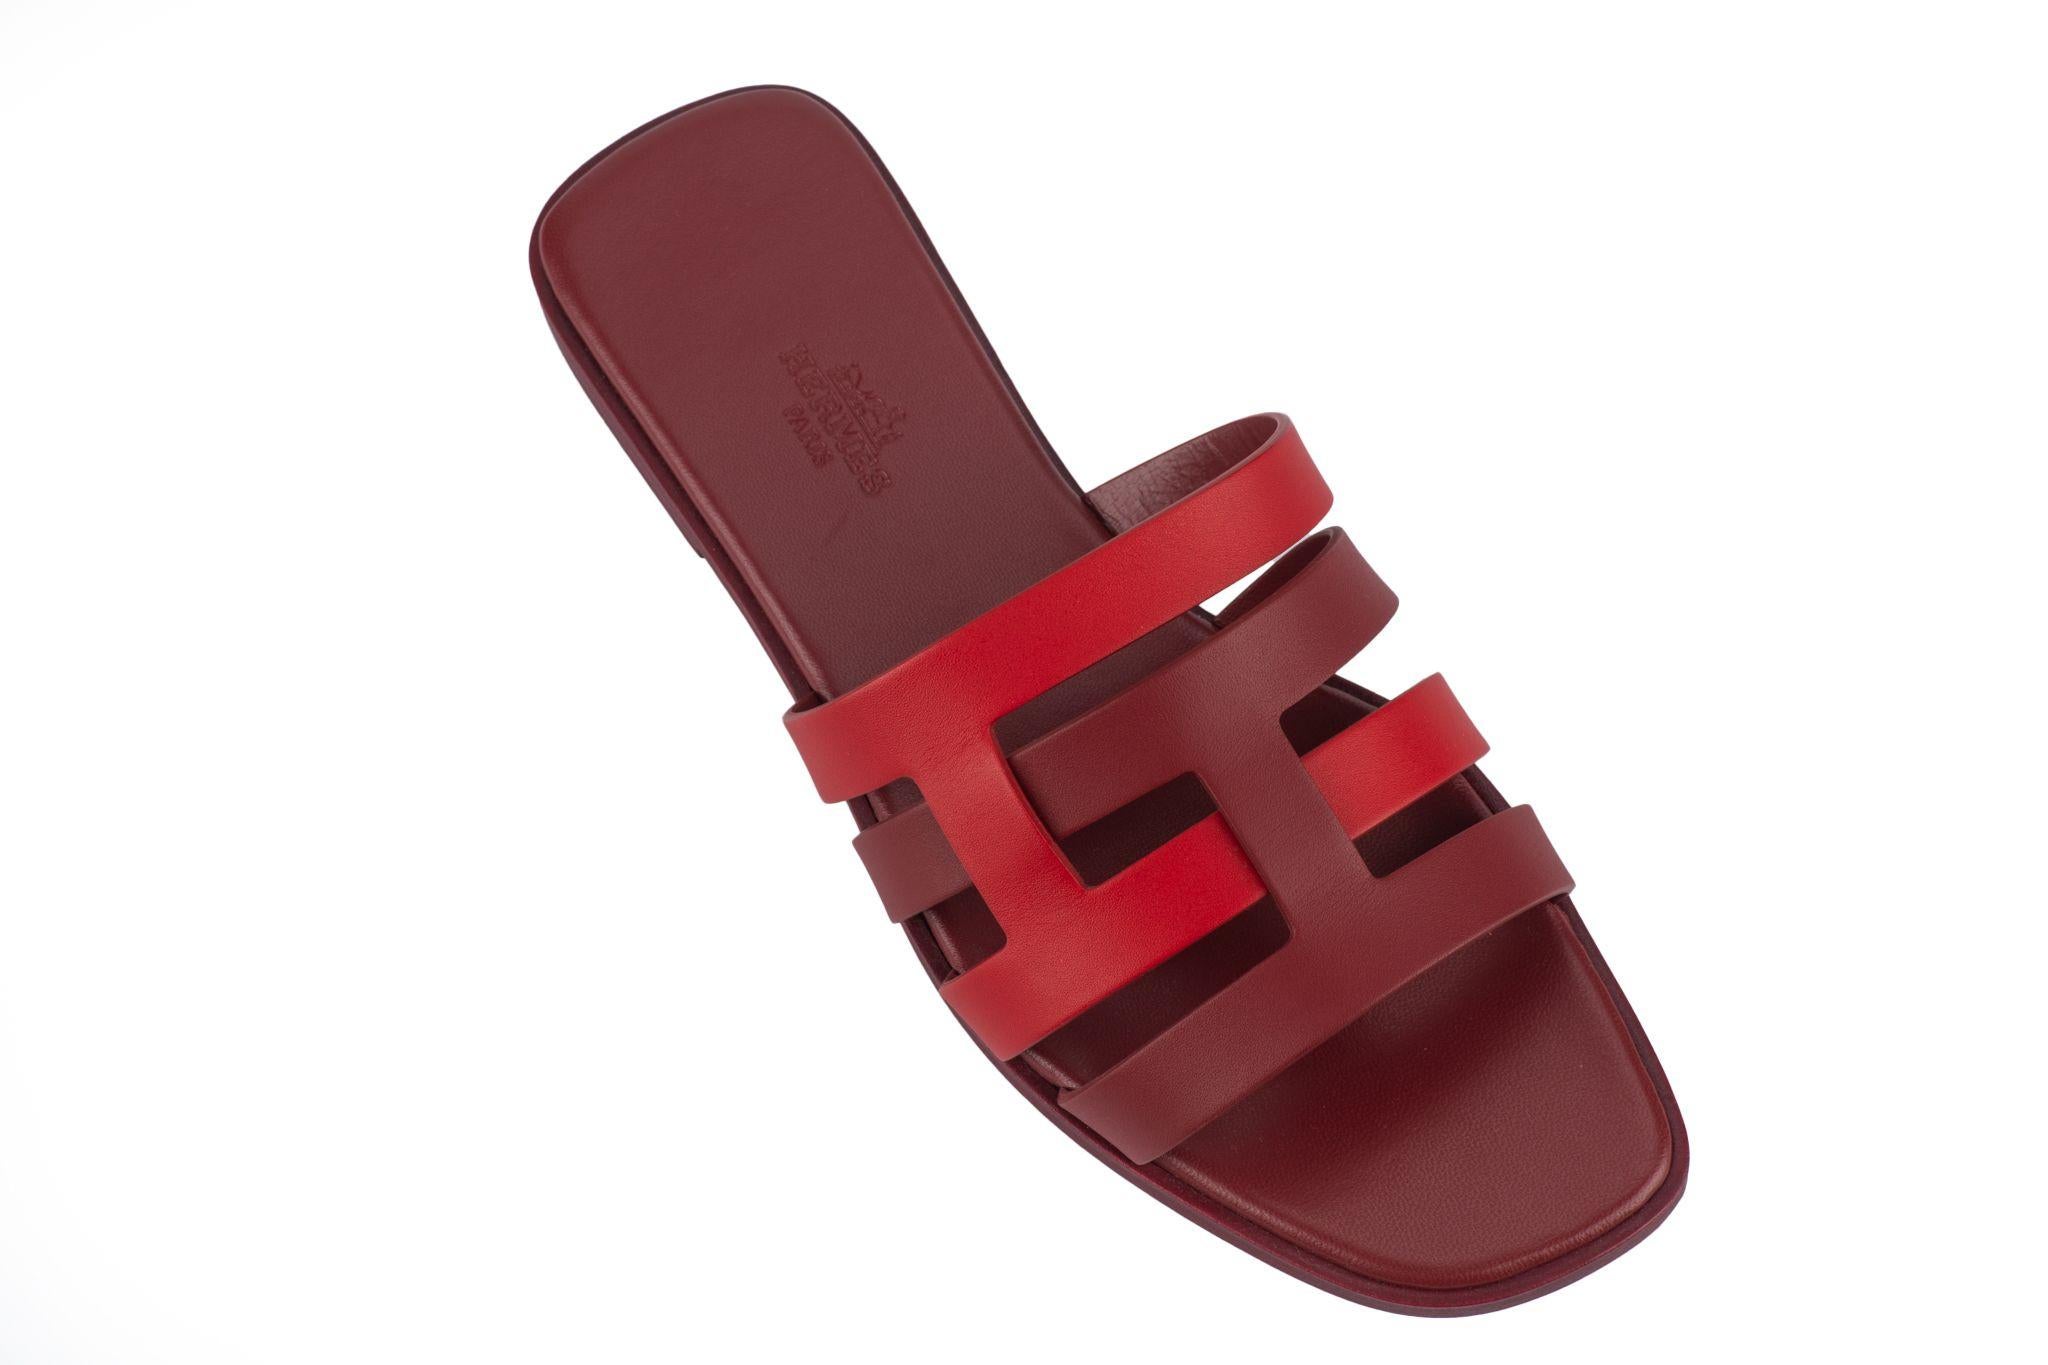 Hermès Amore Slides in Calfskin combination of rouge grenat and orange solaire. These classic sandals feature two intertwined initials and straight cut edges. Italian size 38, US 7.
Brand new with double dustcover and original box.